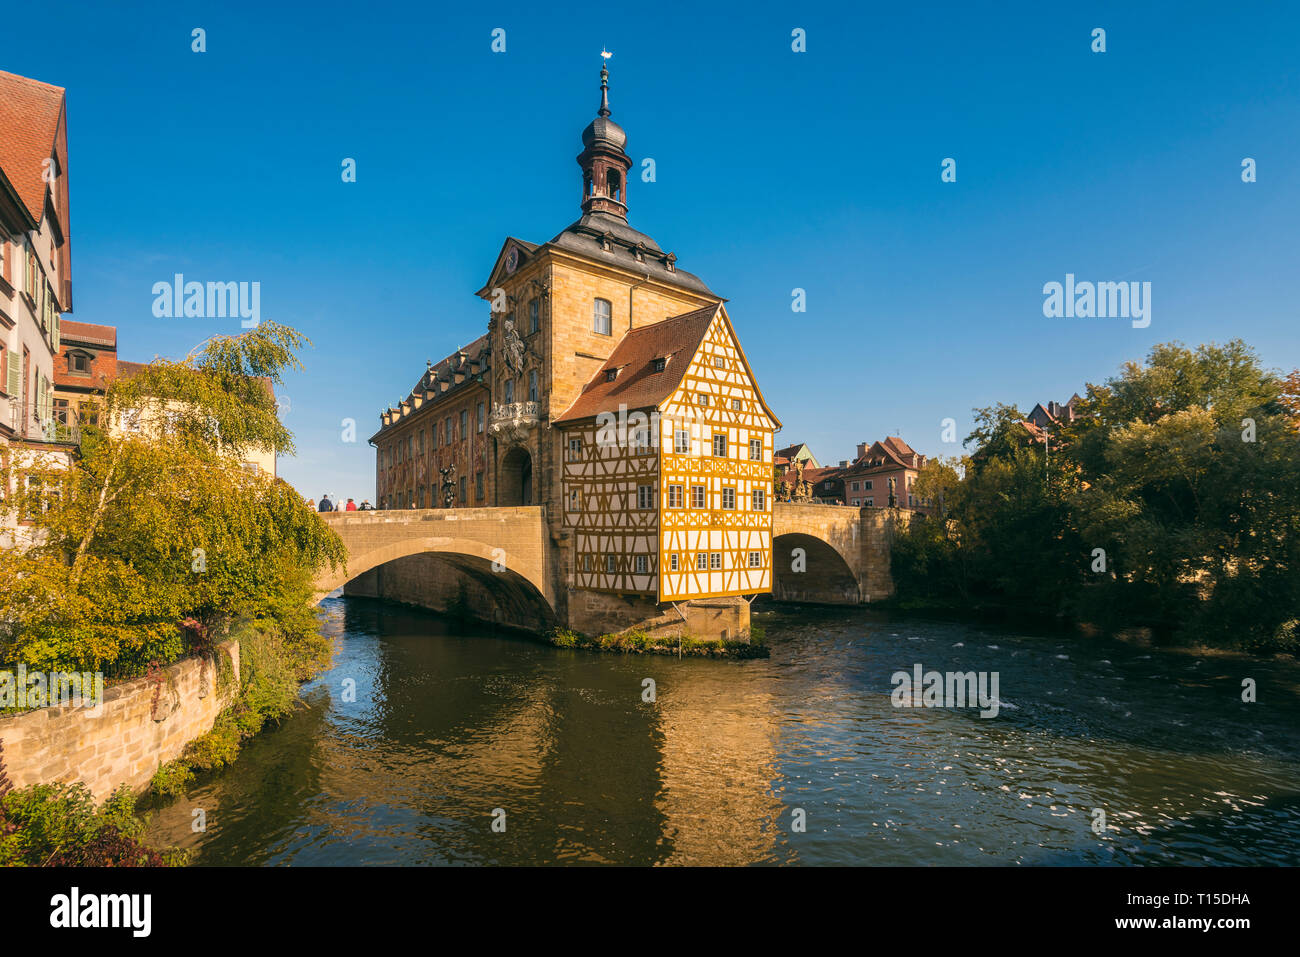 Germany, Bavaria, Bamberg, Old town hall, Obere Bruecke and Regnitz river Stock Photo